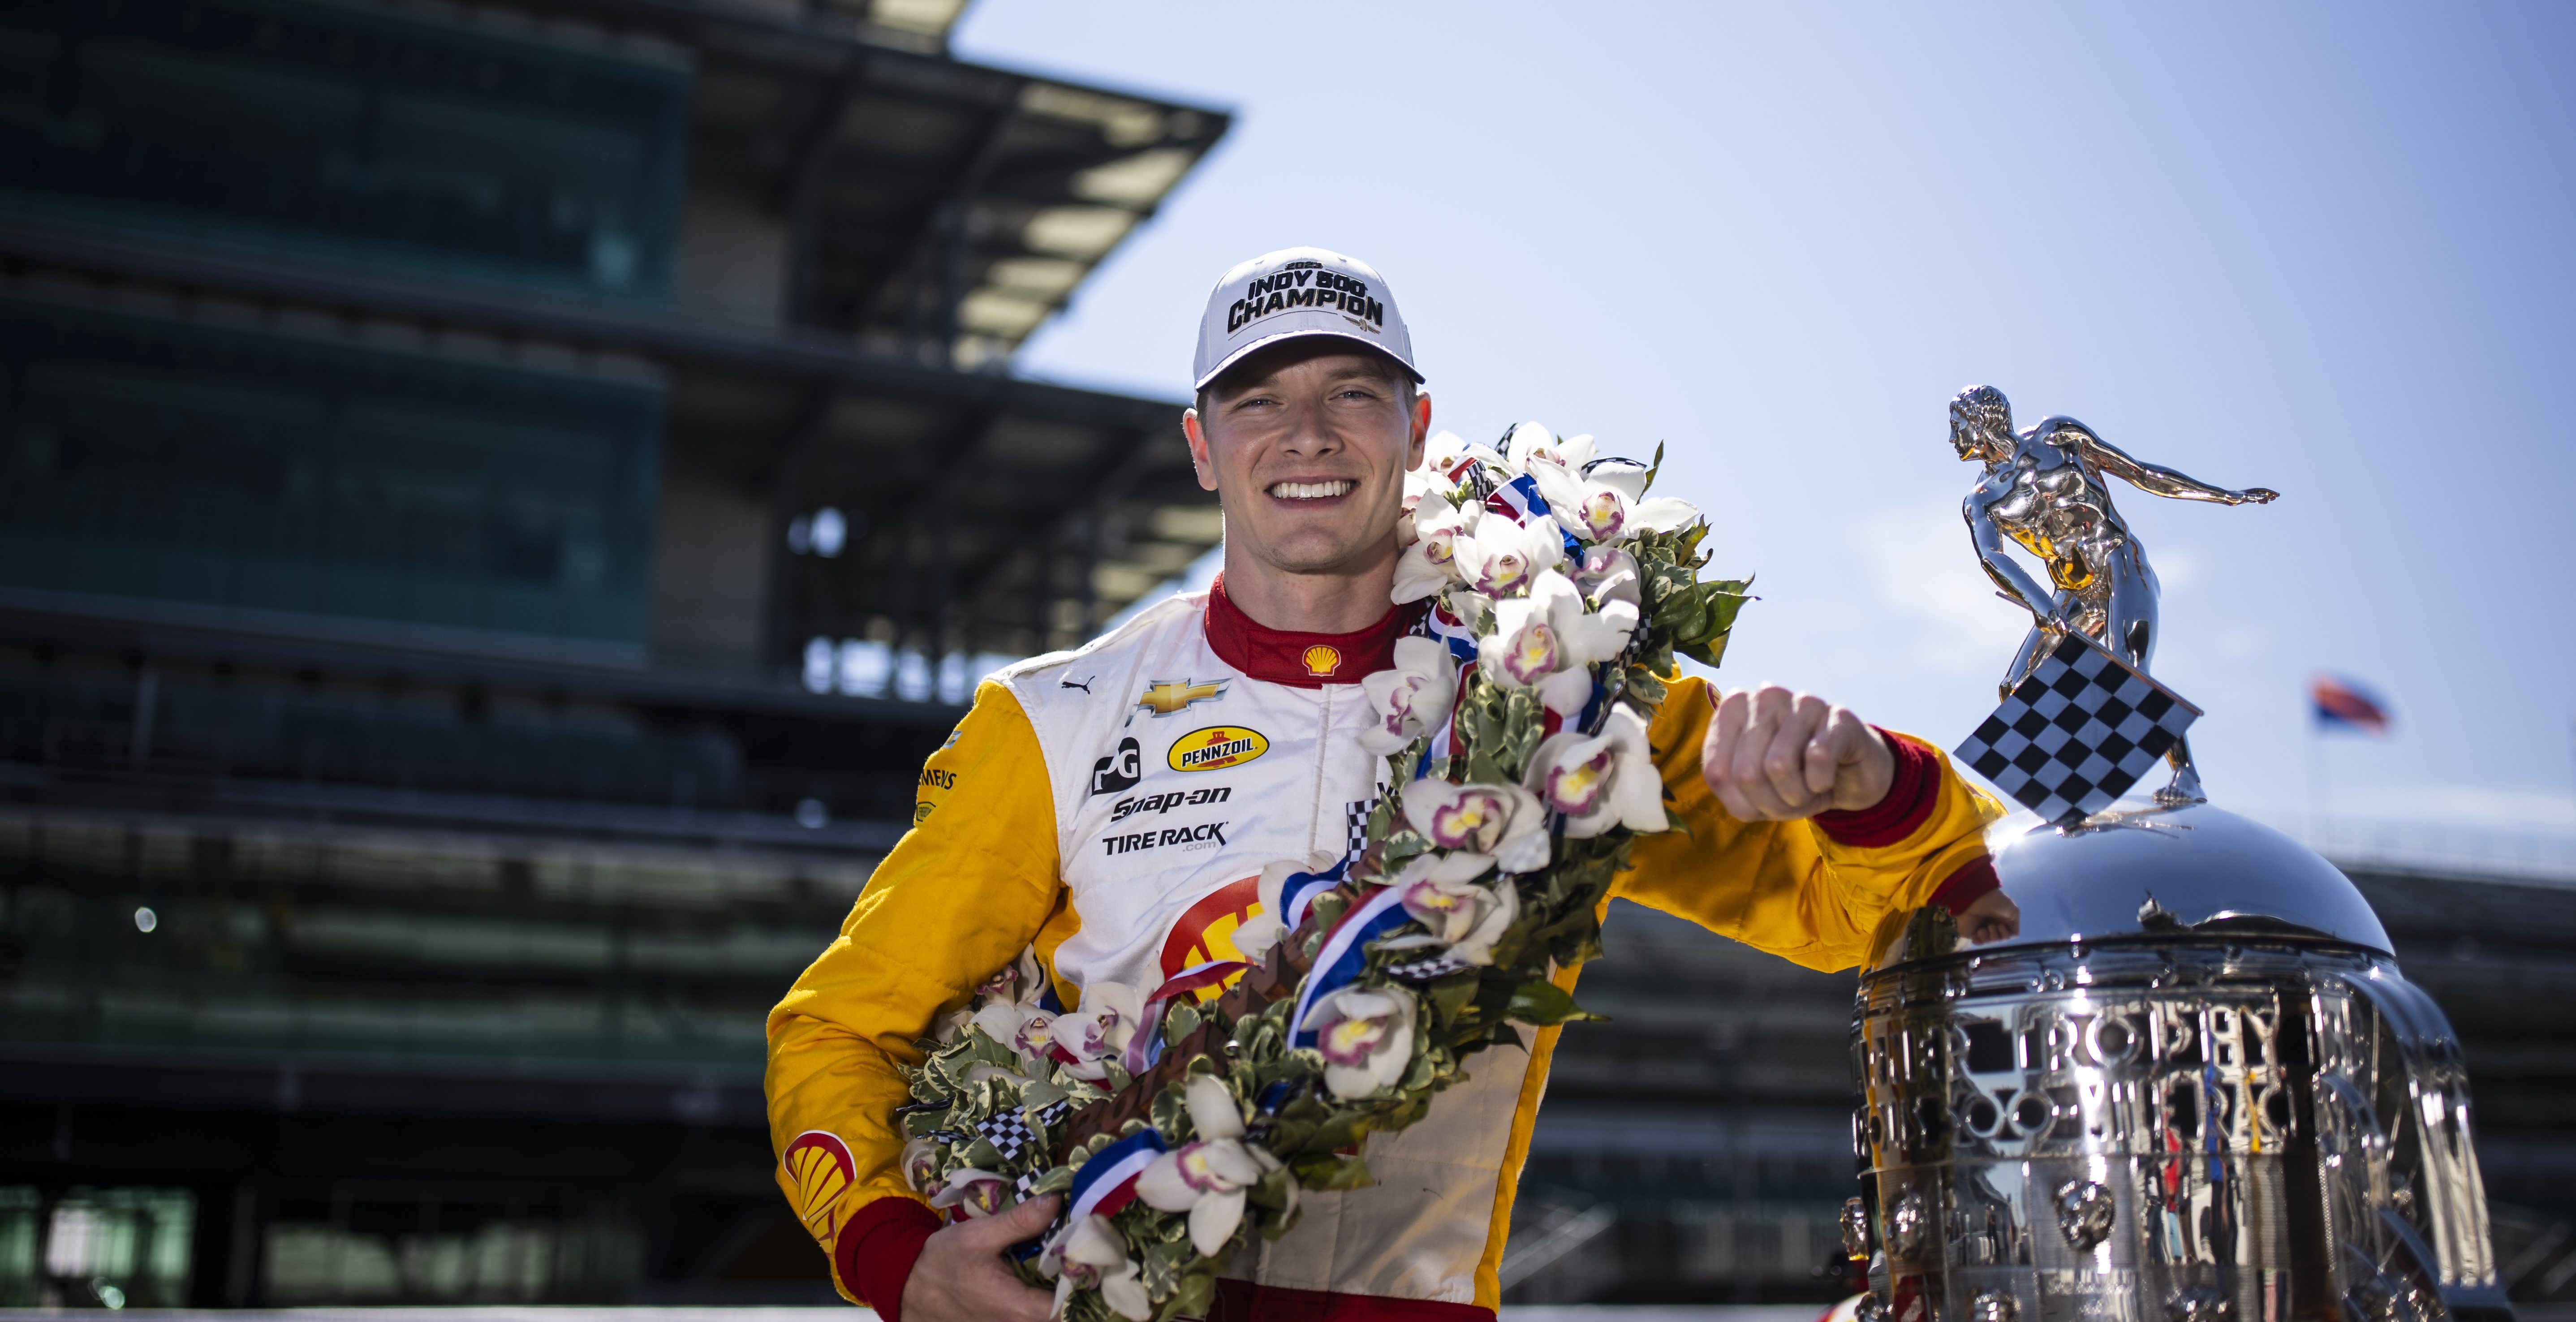 INDIANAPOLIS, INDIANA - MAY 29: Josef Newgarden, driver of the #2 PPG Team Penske Chevrolet, poses for a photo during the 107th Indianapolis 500 champion's portraits at Indianapolis Motor Speedway on May 29, 2023 in Indianapolis, Indiana.